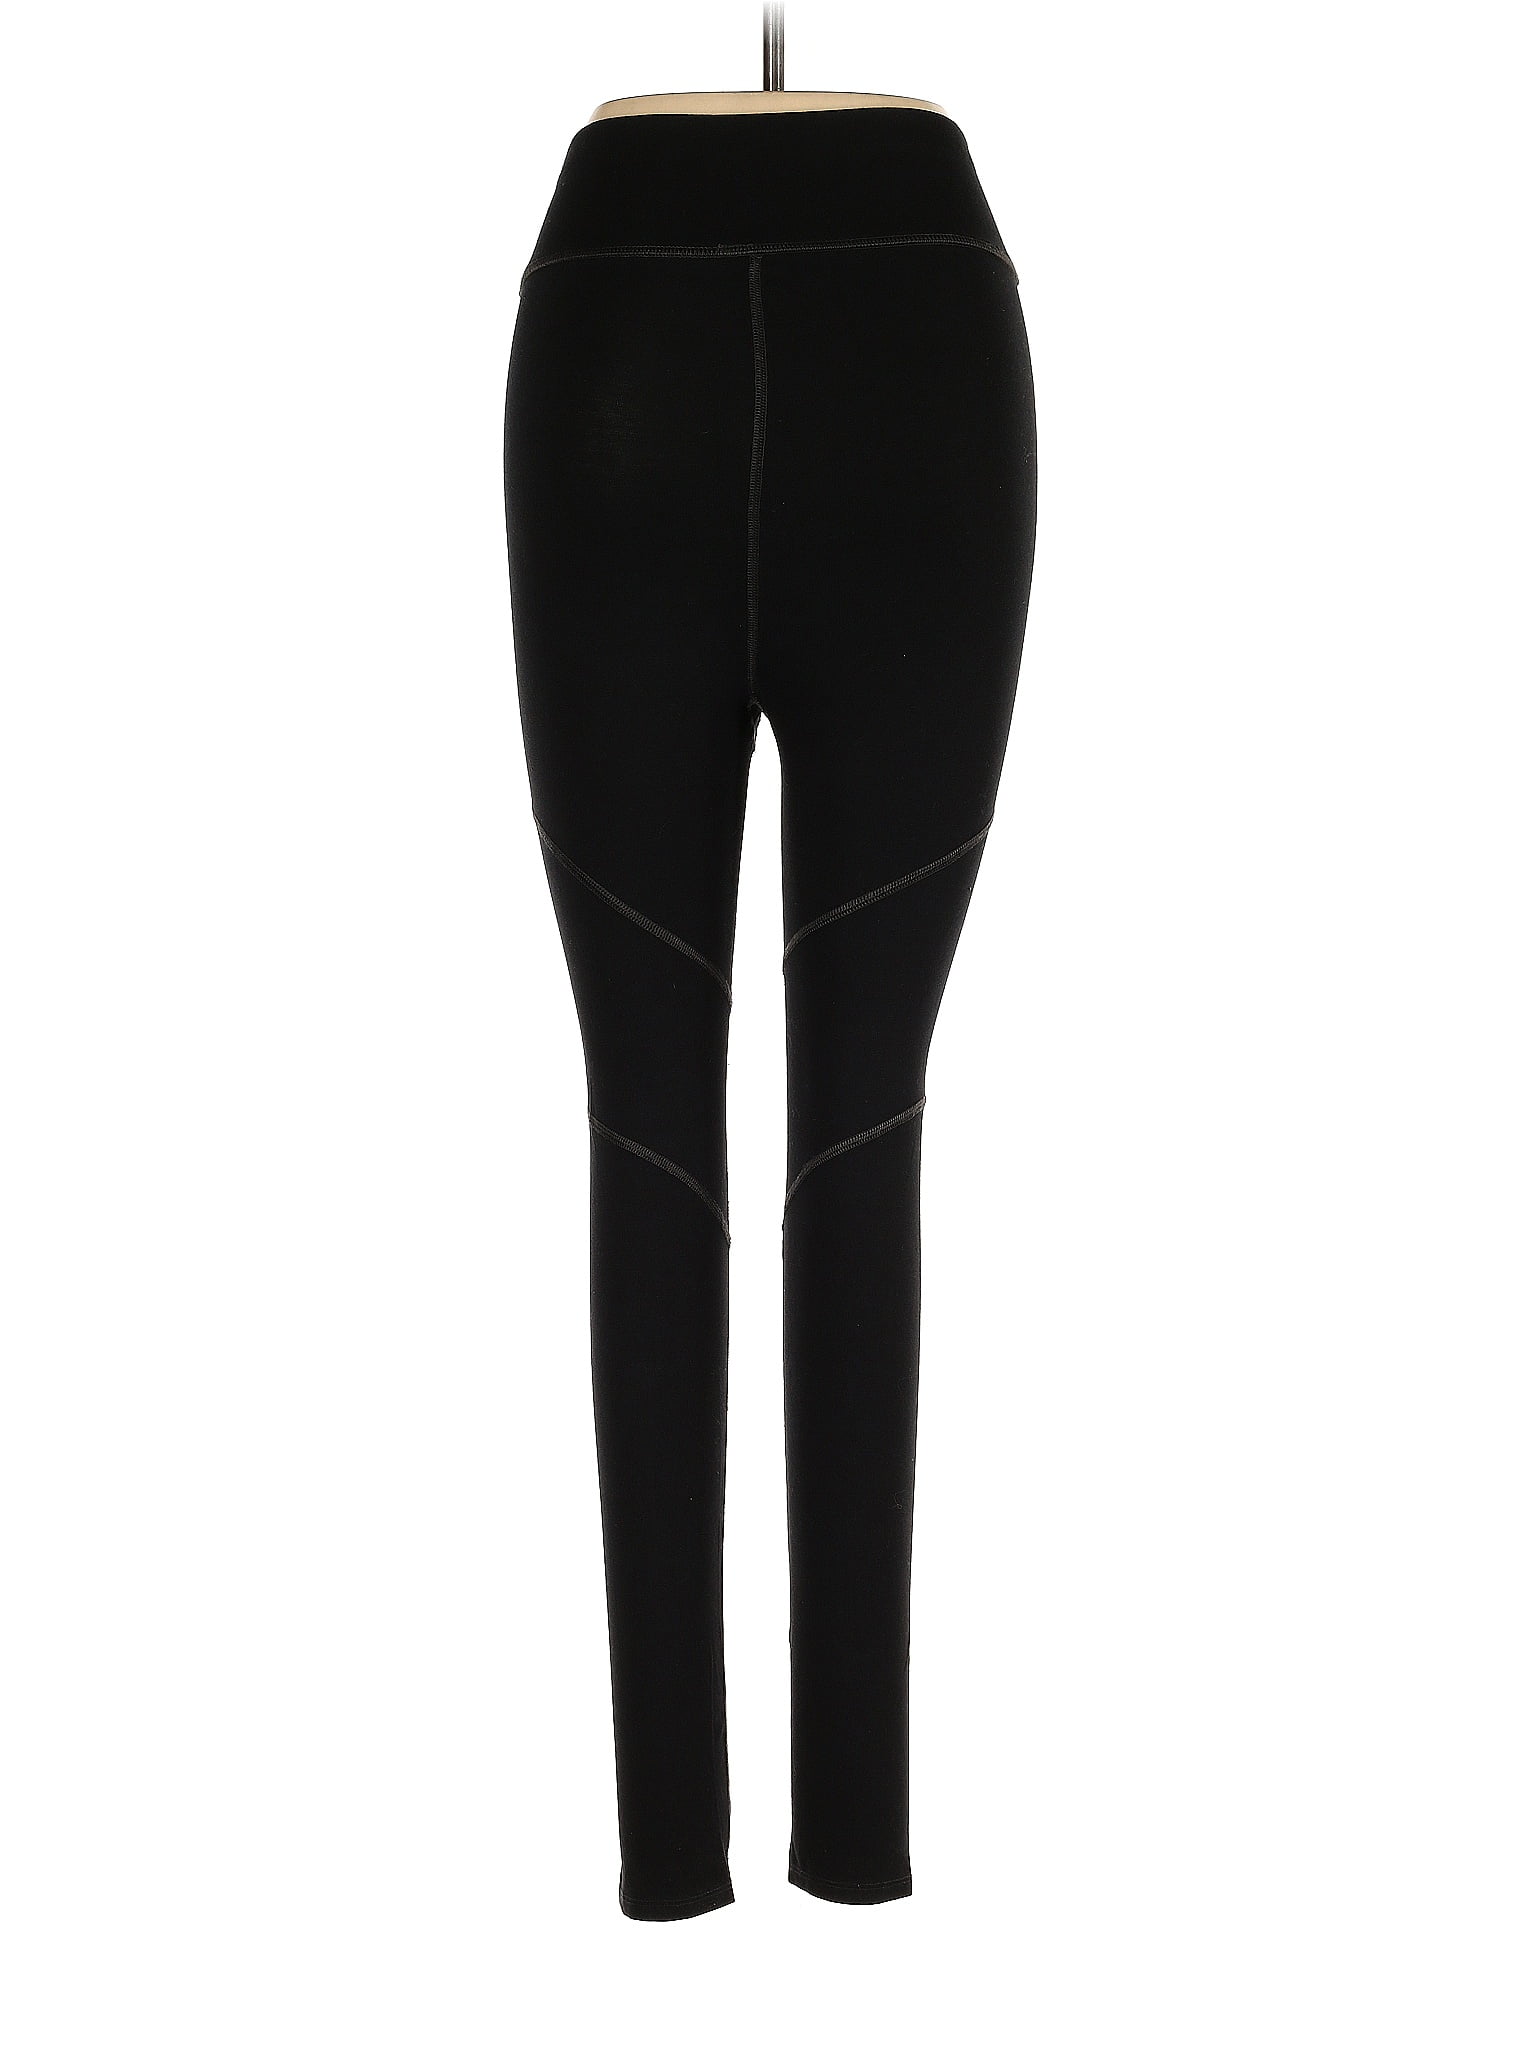 Pact Women's Leggings On Sale Up To 90% Off Retail